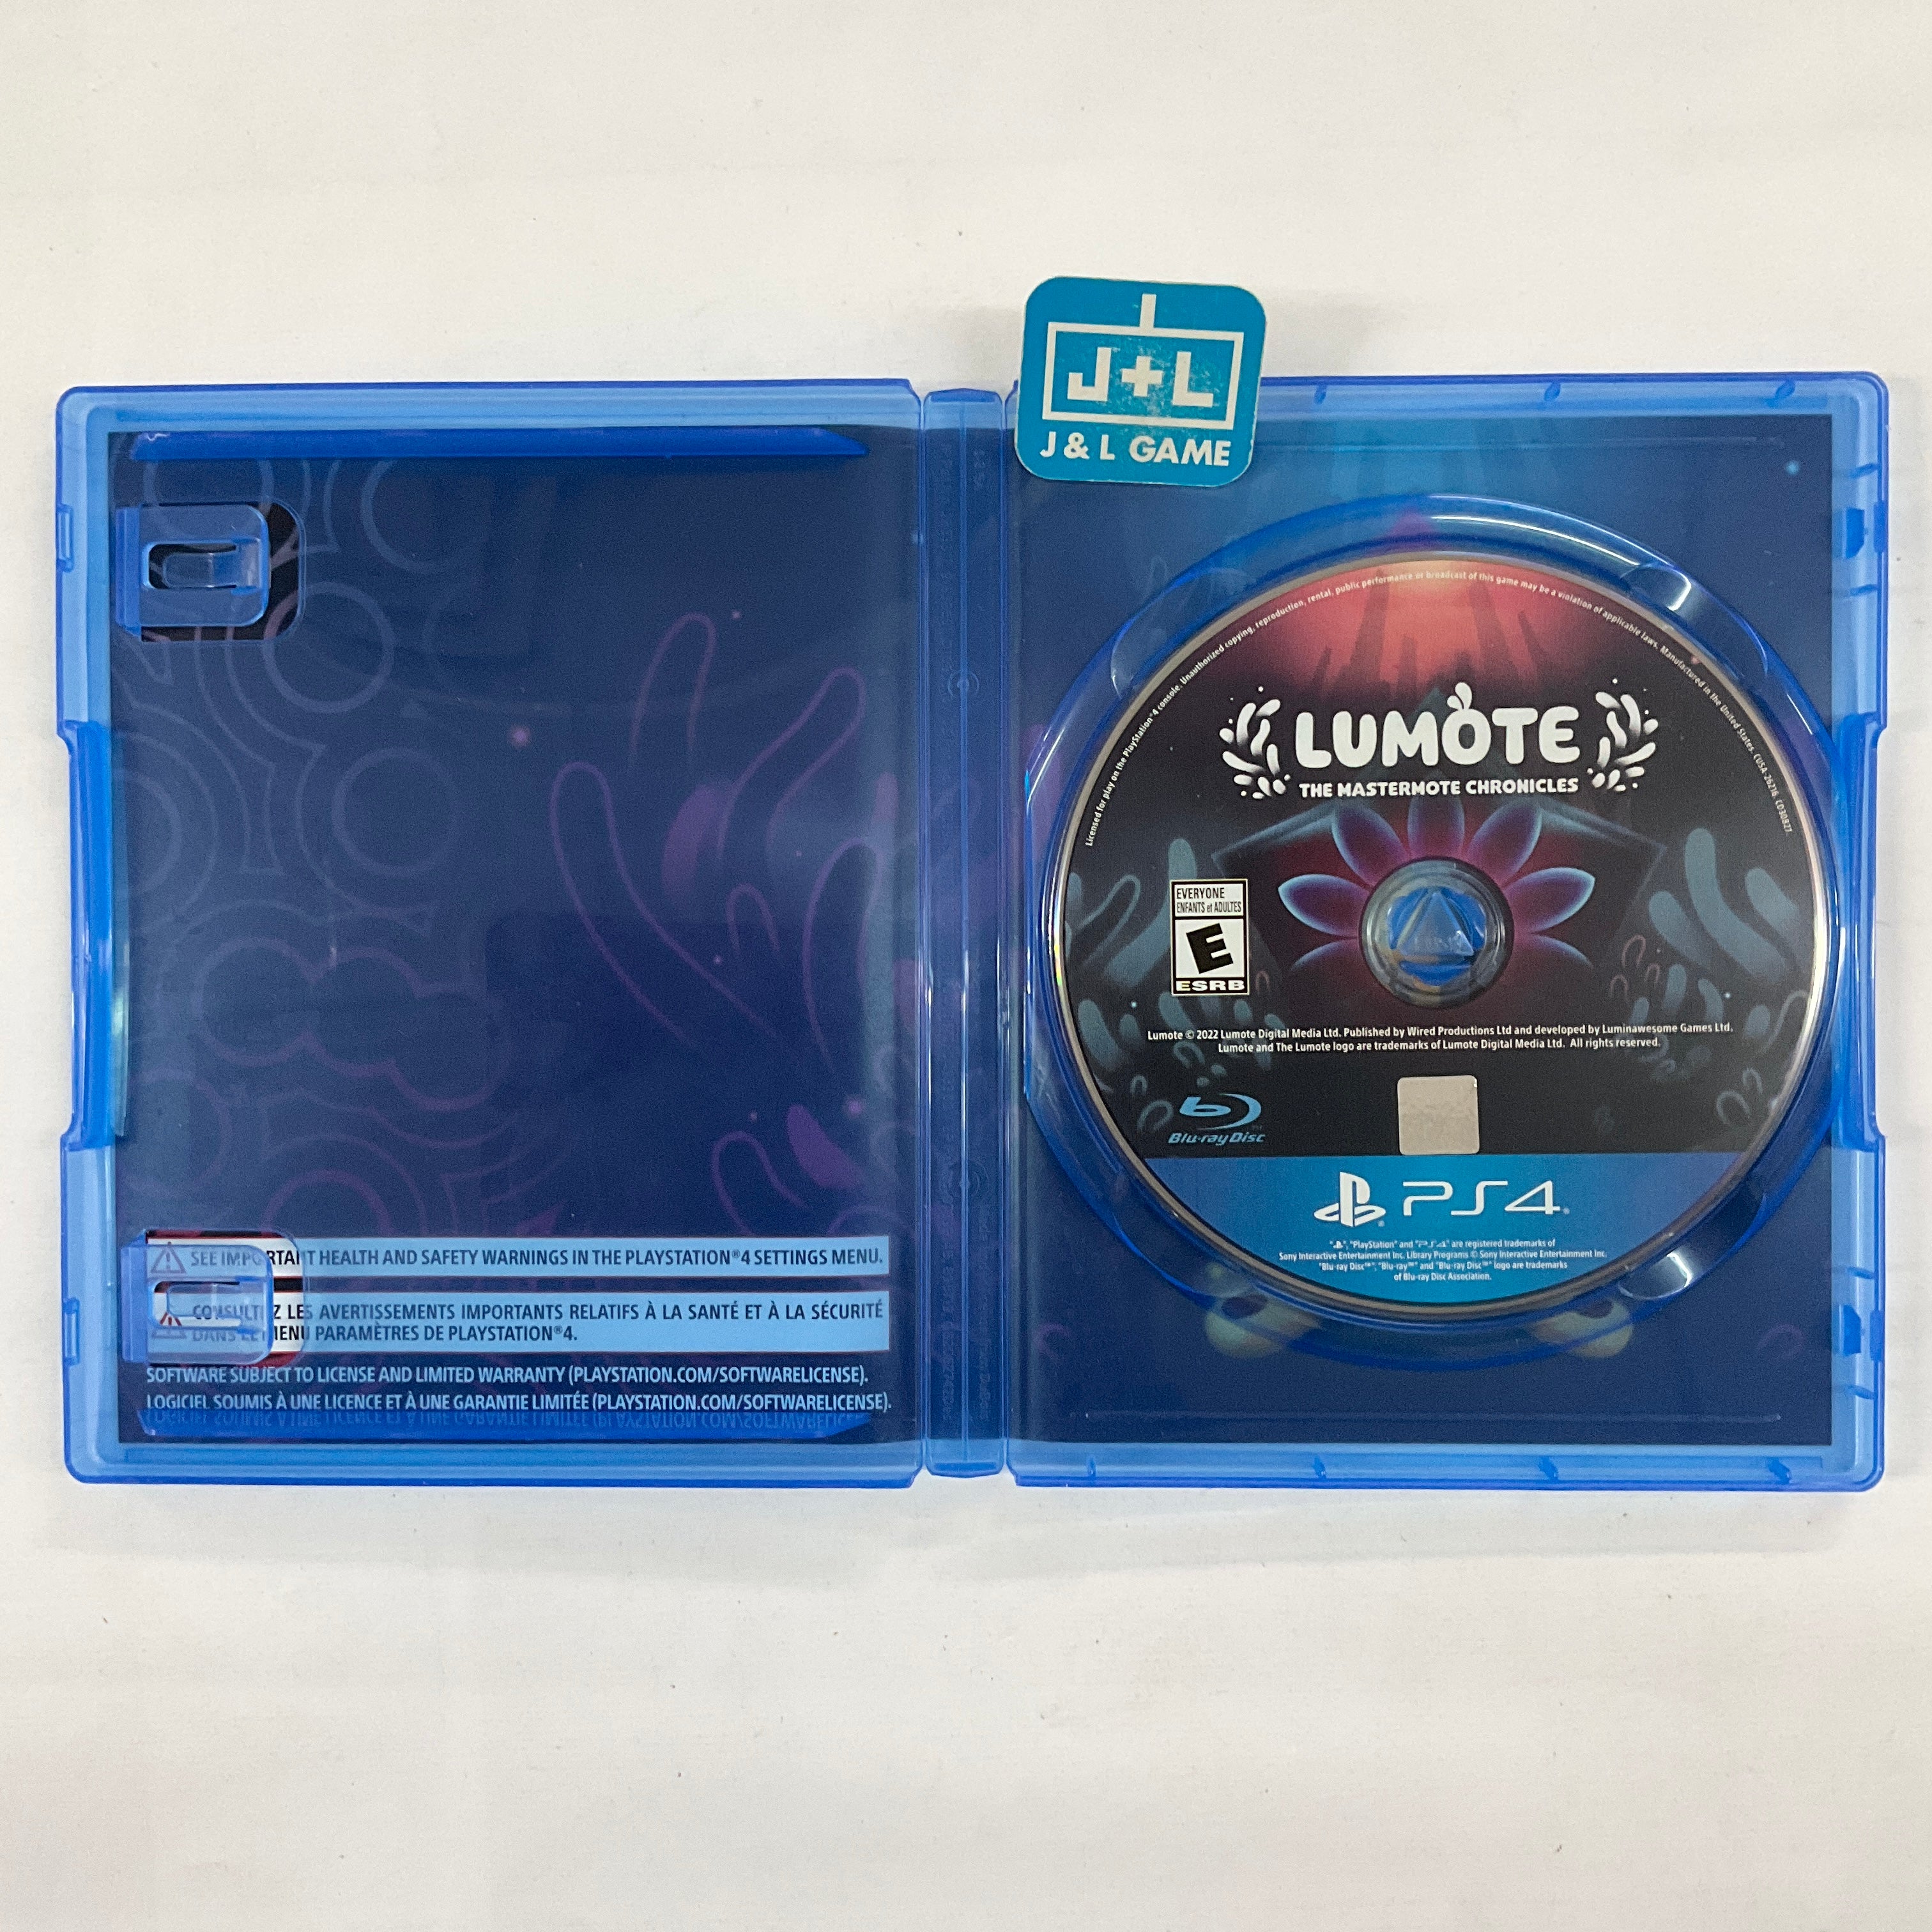 Lumote: The Mastermote Chronicles - (PS4) PlayStation 4 [Pre-Owned] Video Games Limited Run Games   